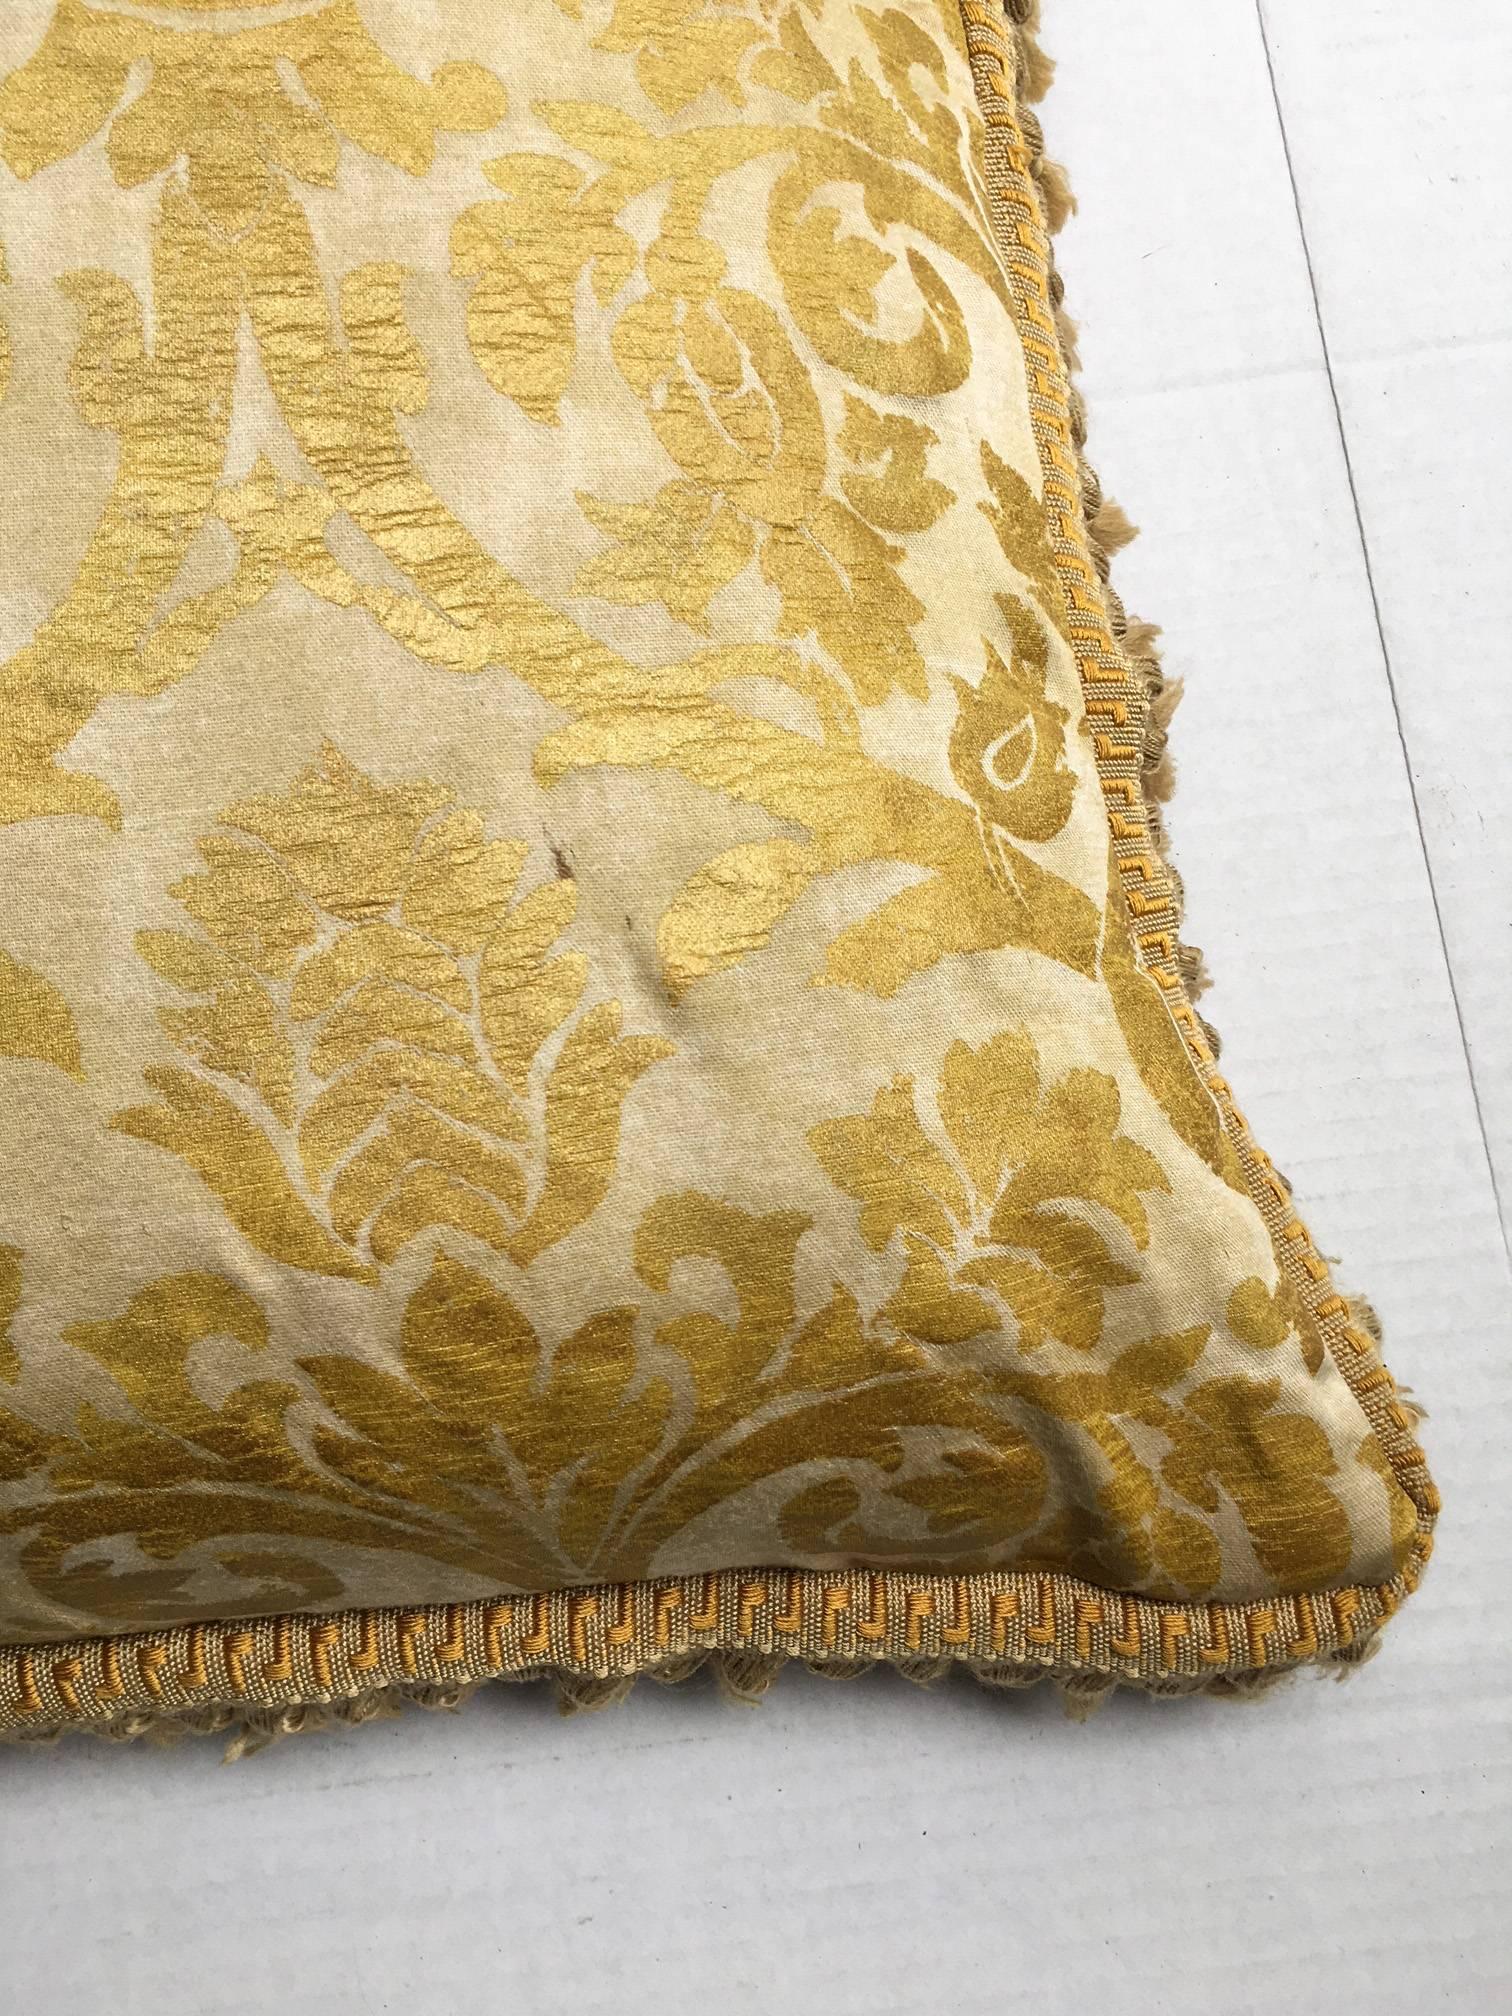 Beyond fabulous vintage Fortuny gold silk damask pillow which reverses to red and gold. The pillow is trimmed in a gold onion fringe. Zipper closure with a newer Ralph Lauren velvet interior pillow to prevent the quills from escaping the down